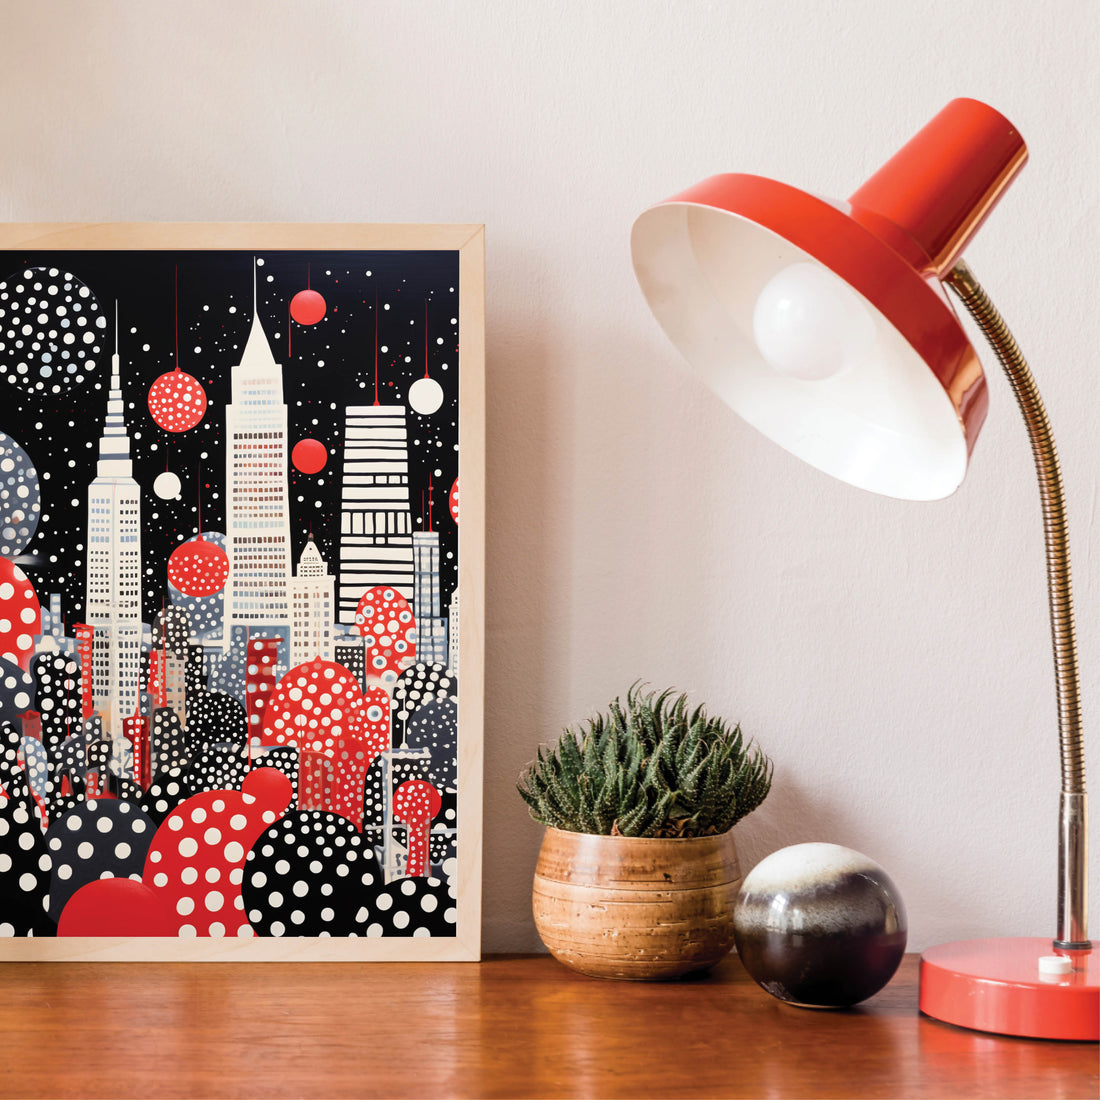 Poster Metropolitan Polkadot - Add sophistication to your home